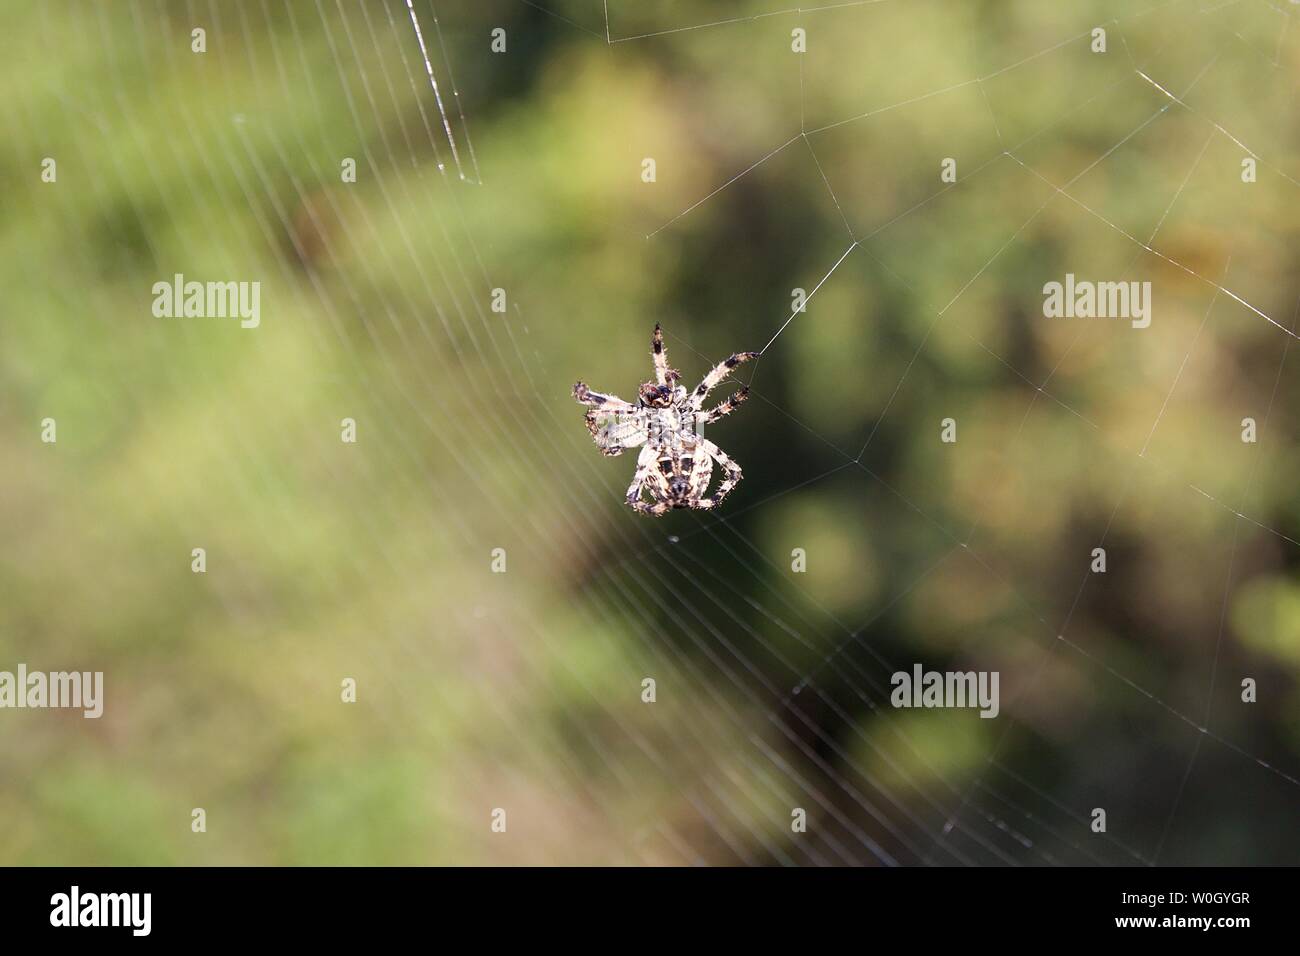 Closeup view from bellow small hairy spider in nature spins a web to catch insects. Blurred background of green plants shrubs and trees in a forest Stock Photo